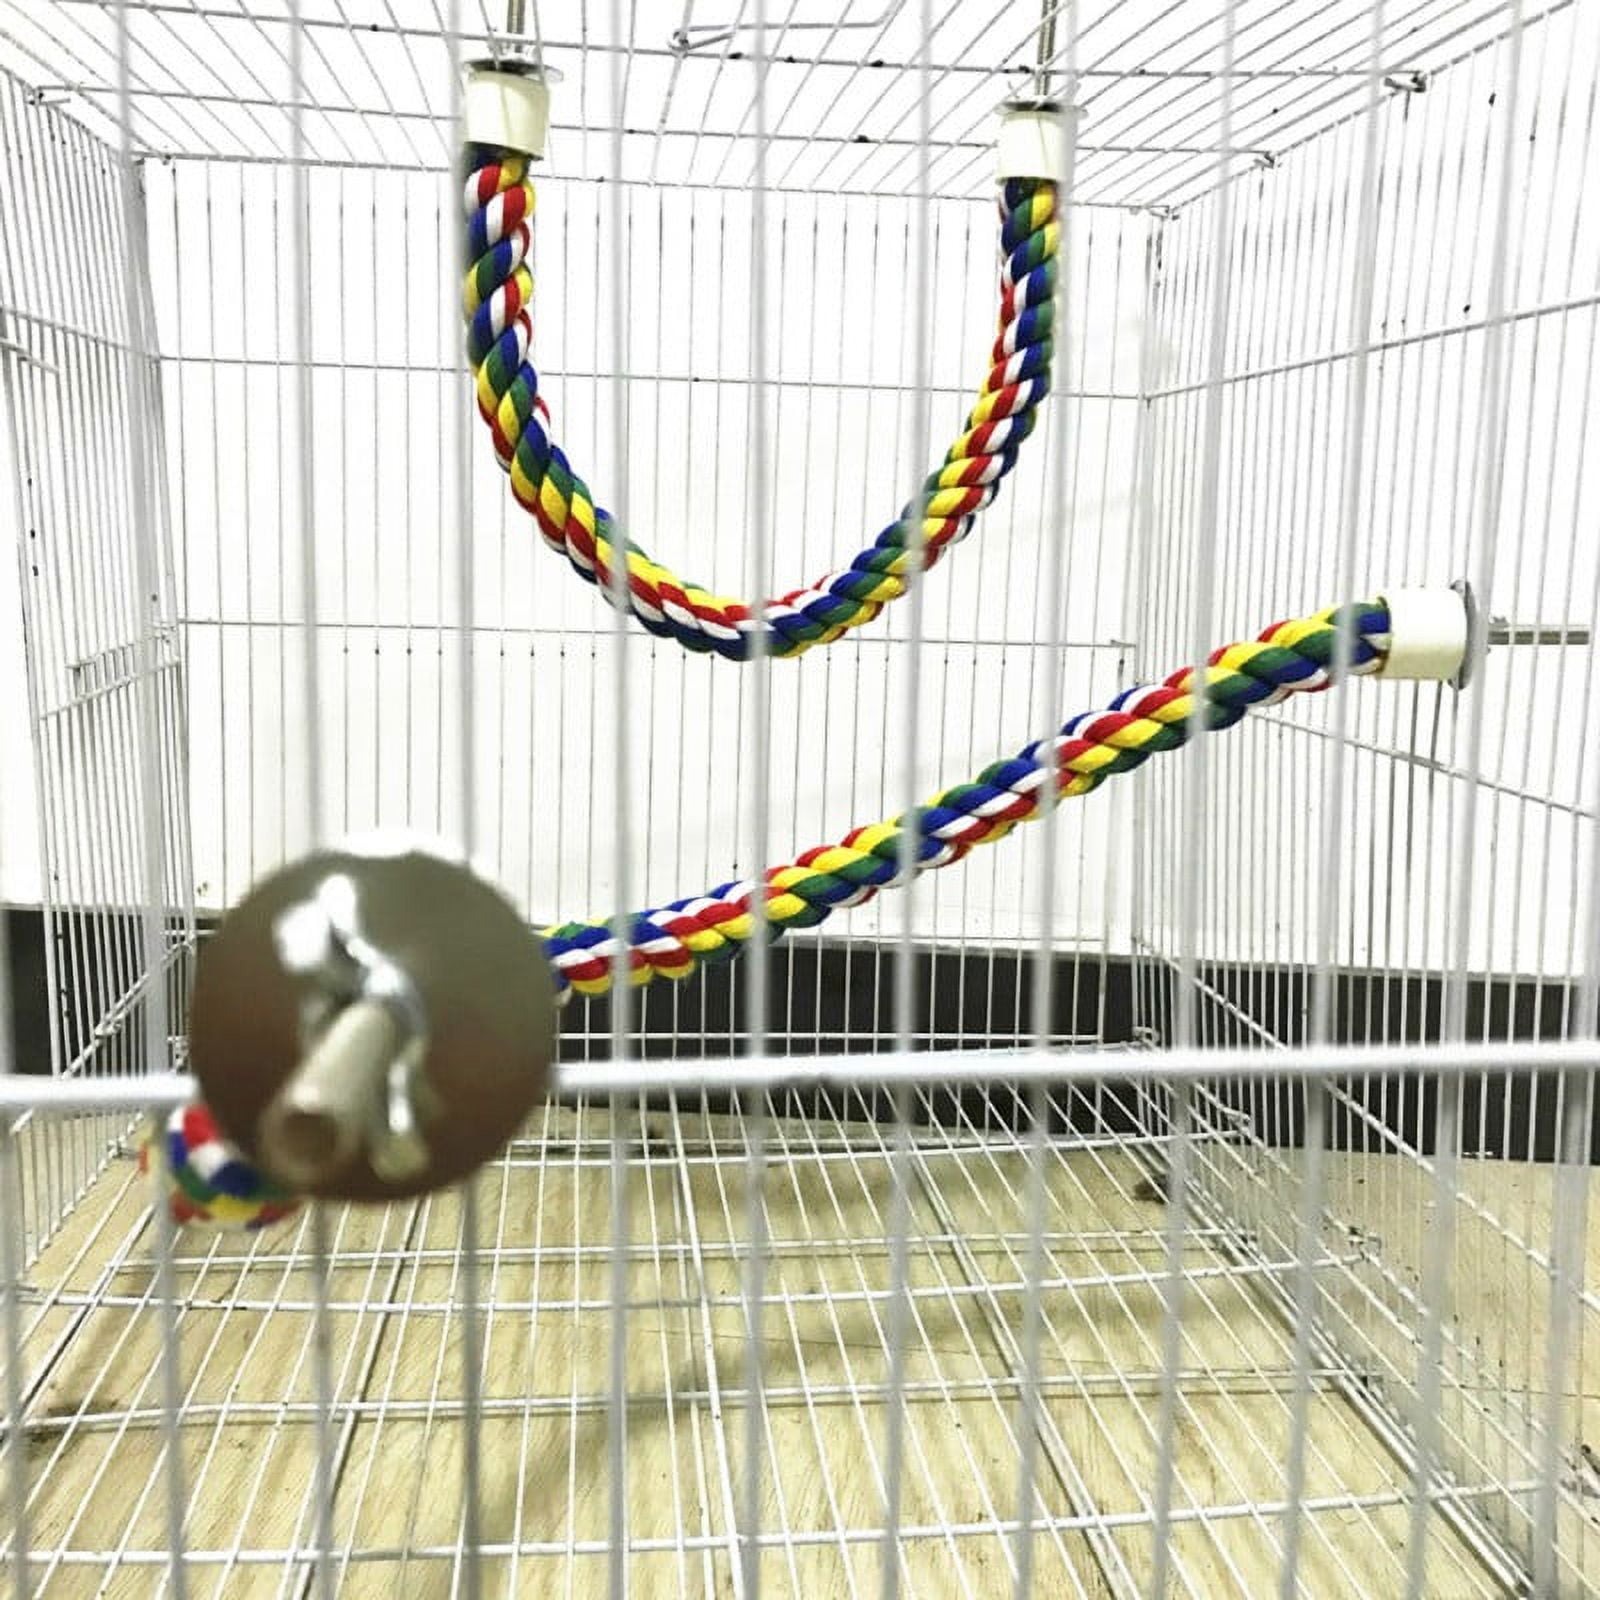 Colorful Bird Rope Perch for Parrots Playing, Chewing or Preening (35 -  Zodaca